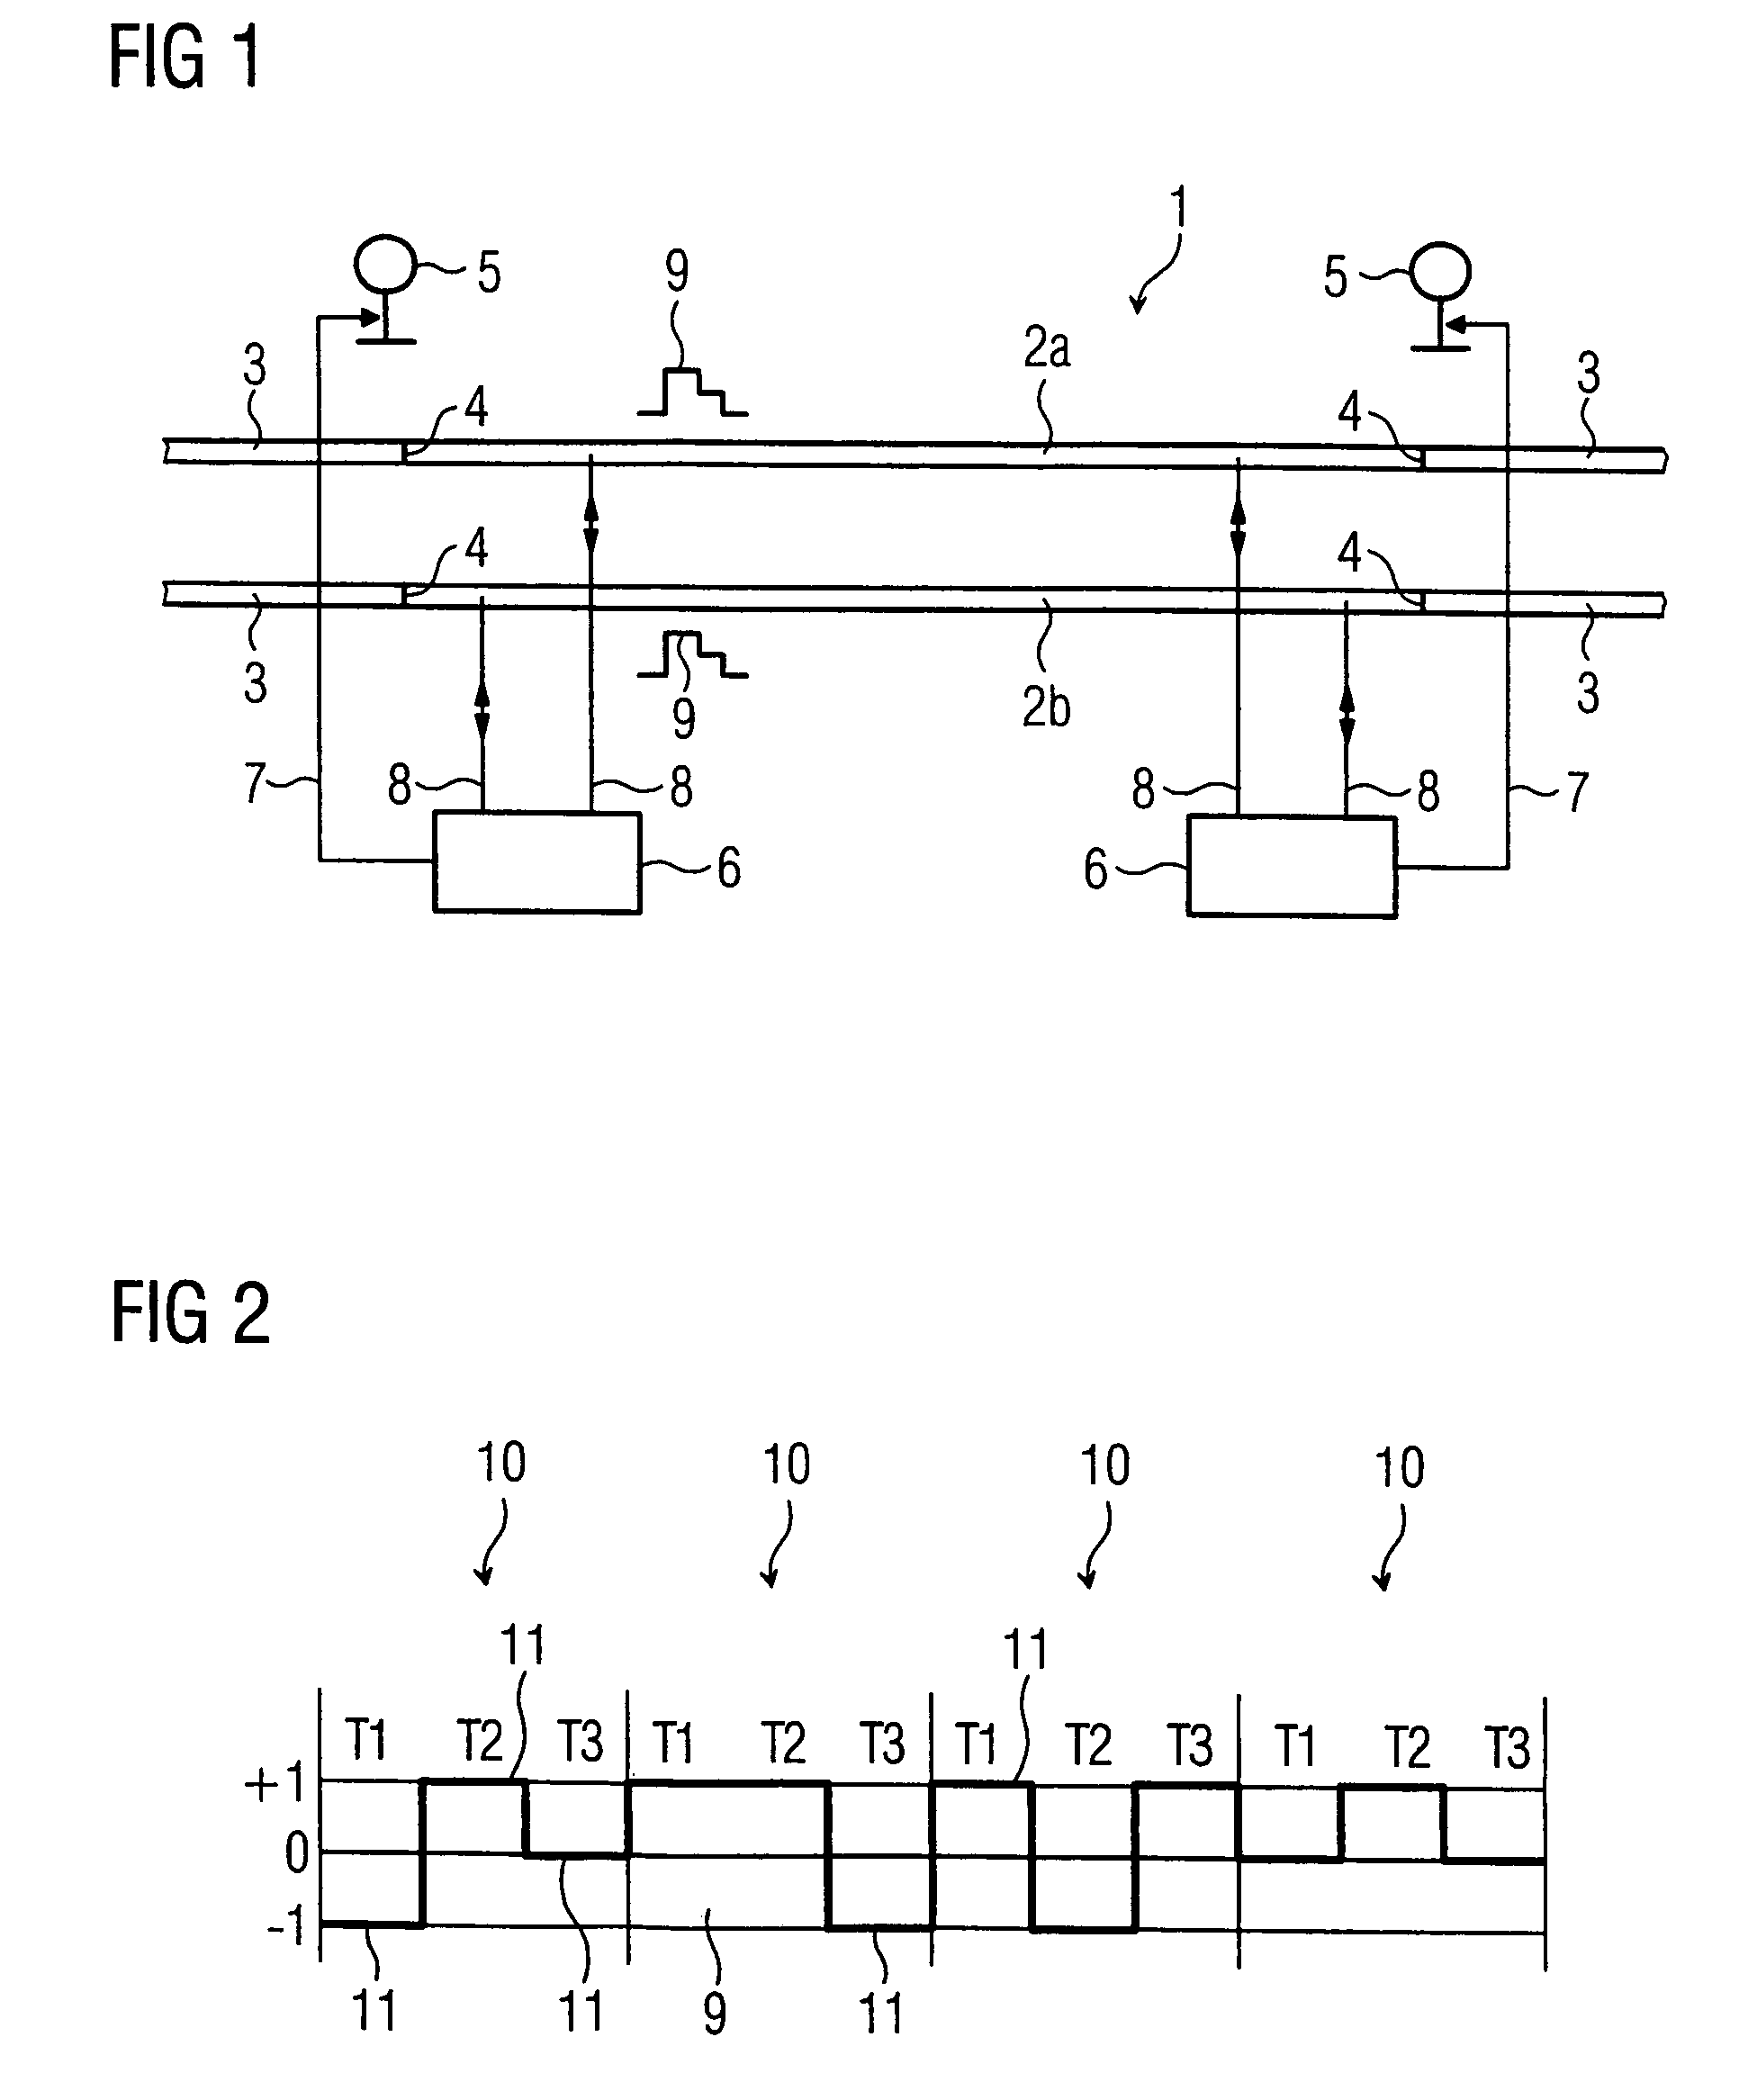 Railway system with at least one track, and method for encoding data for transmission over the track